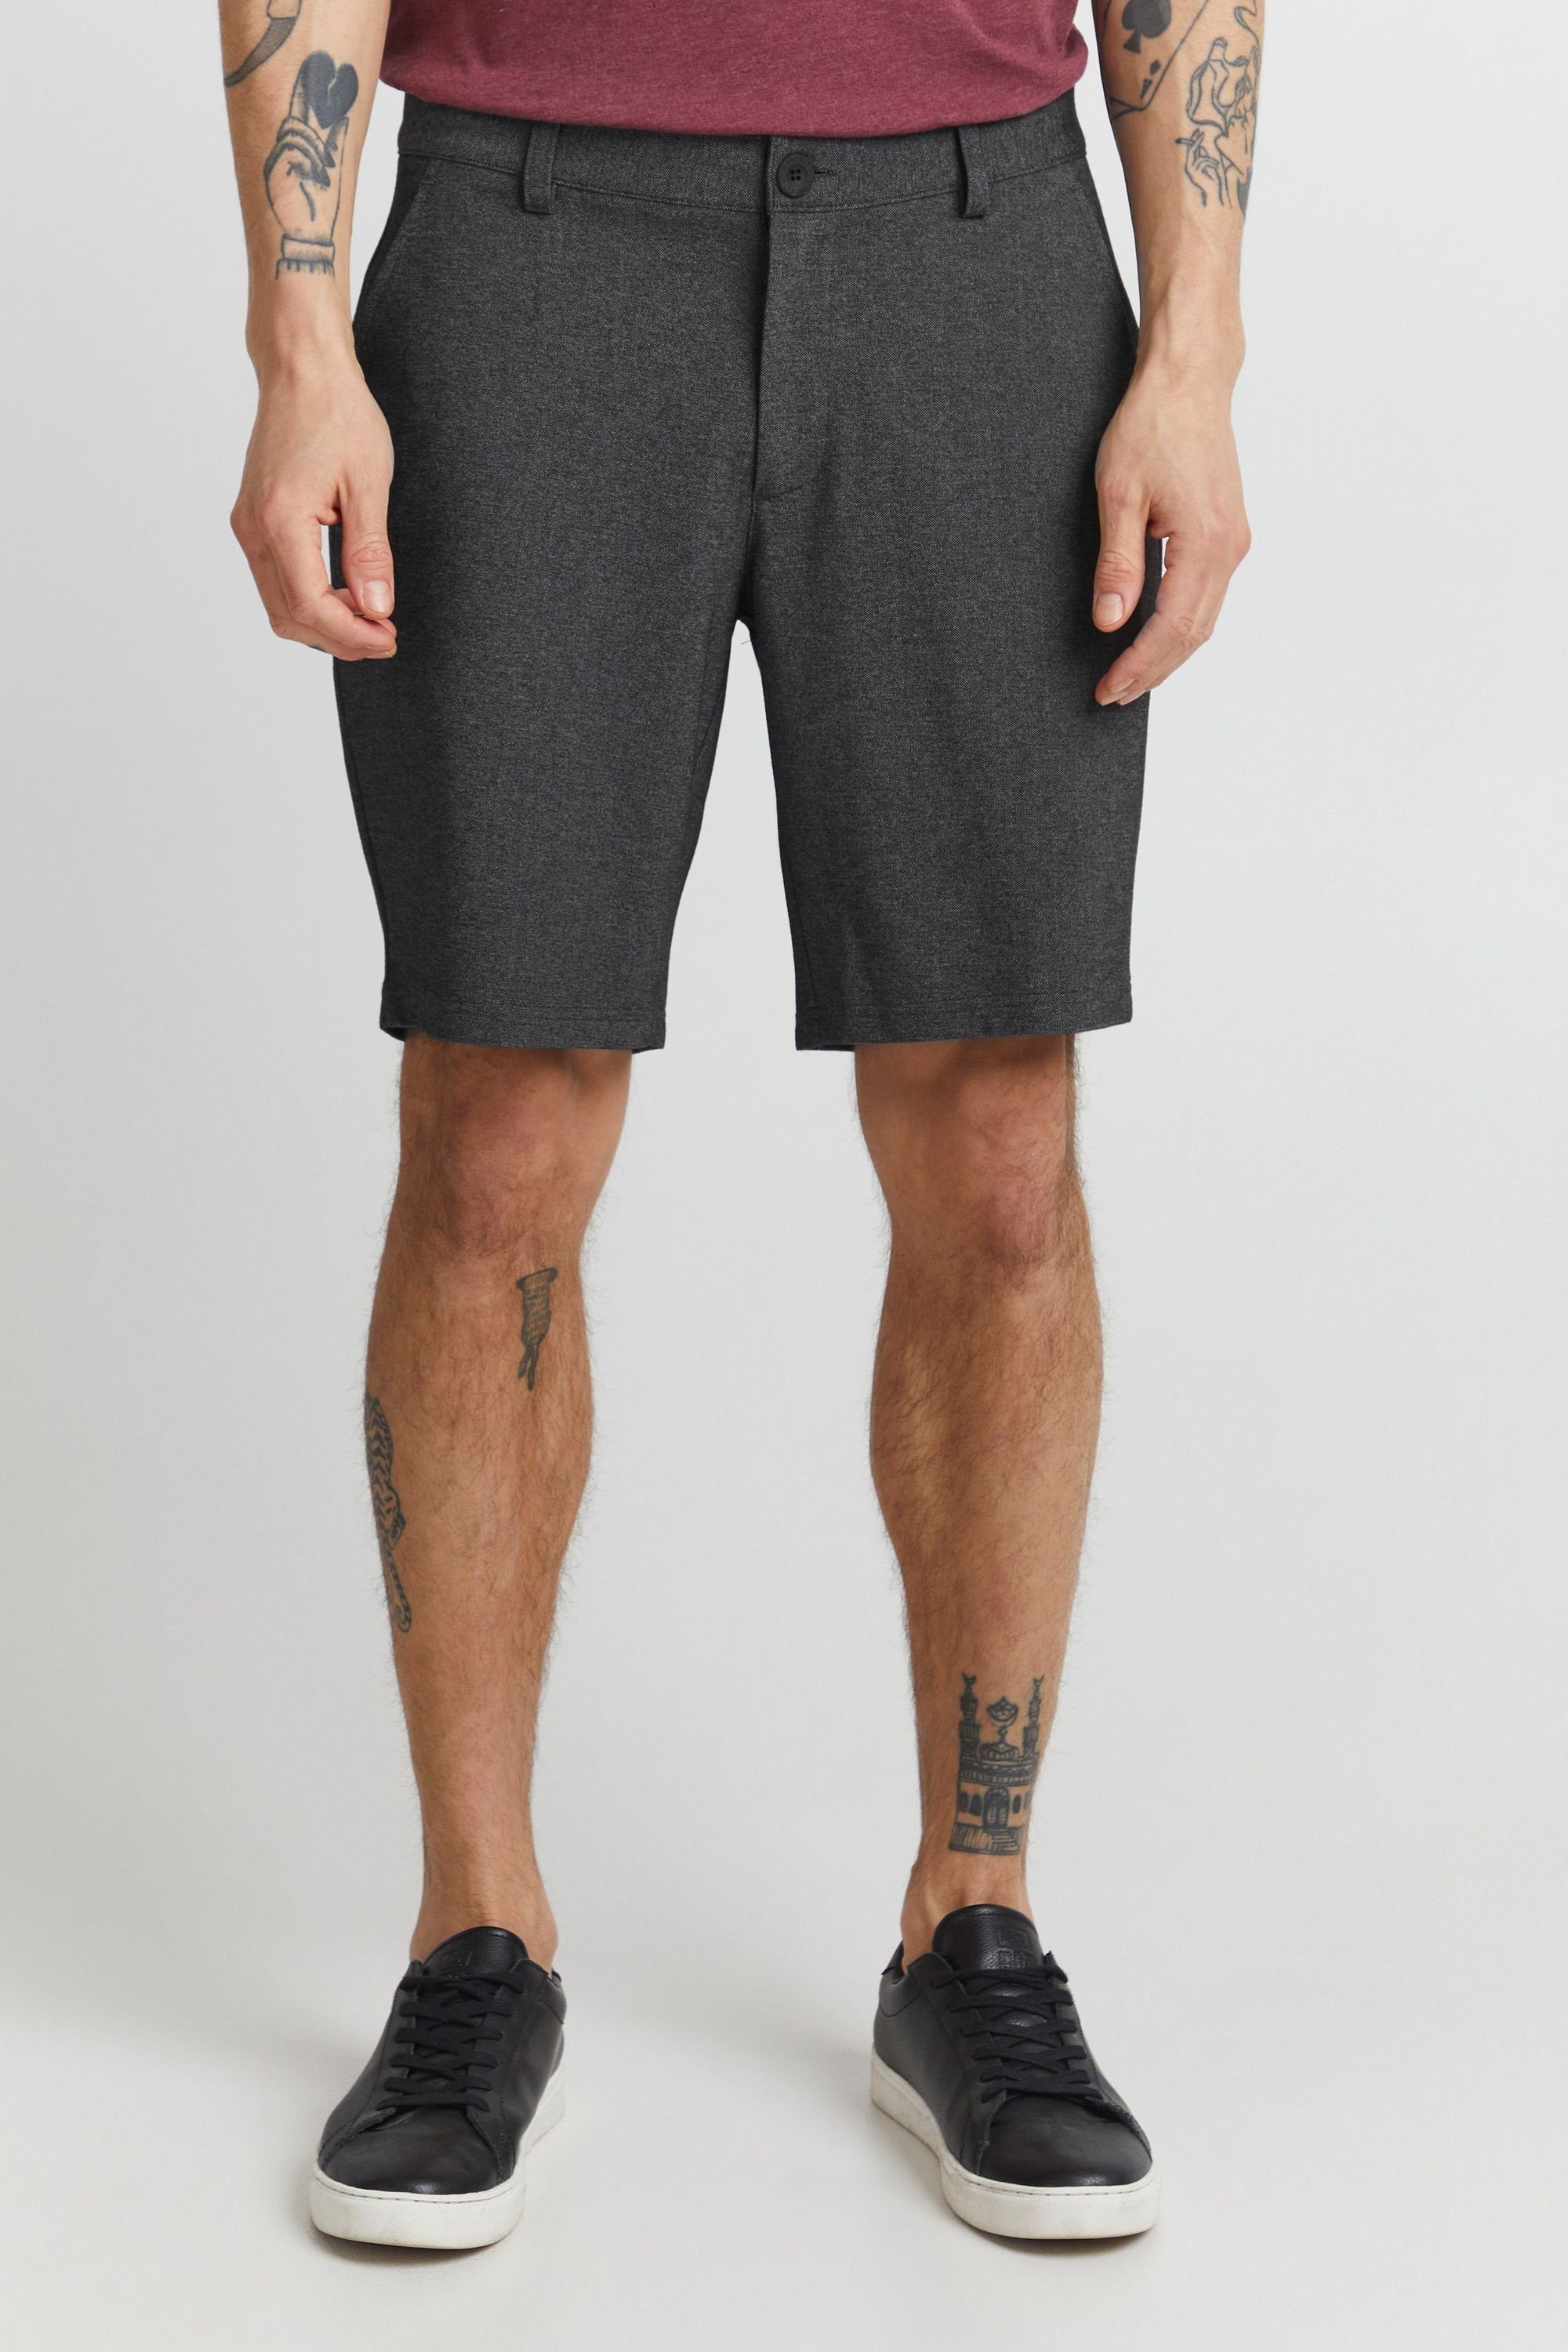 11 Project Project PRCamal Charcoal Shorts Mix 11